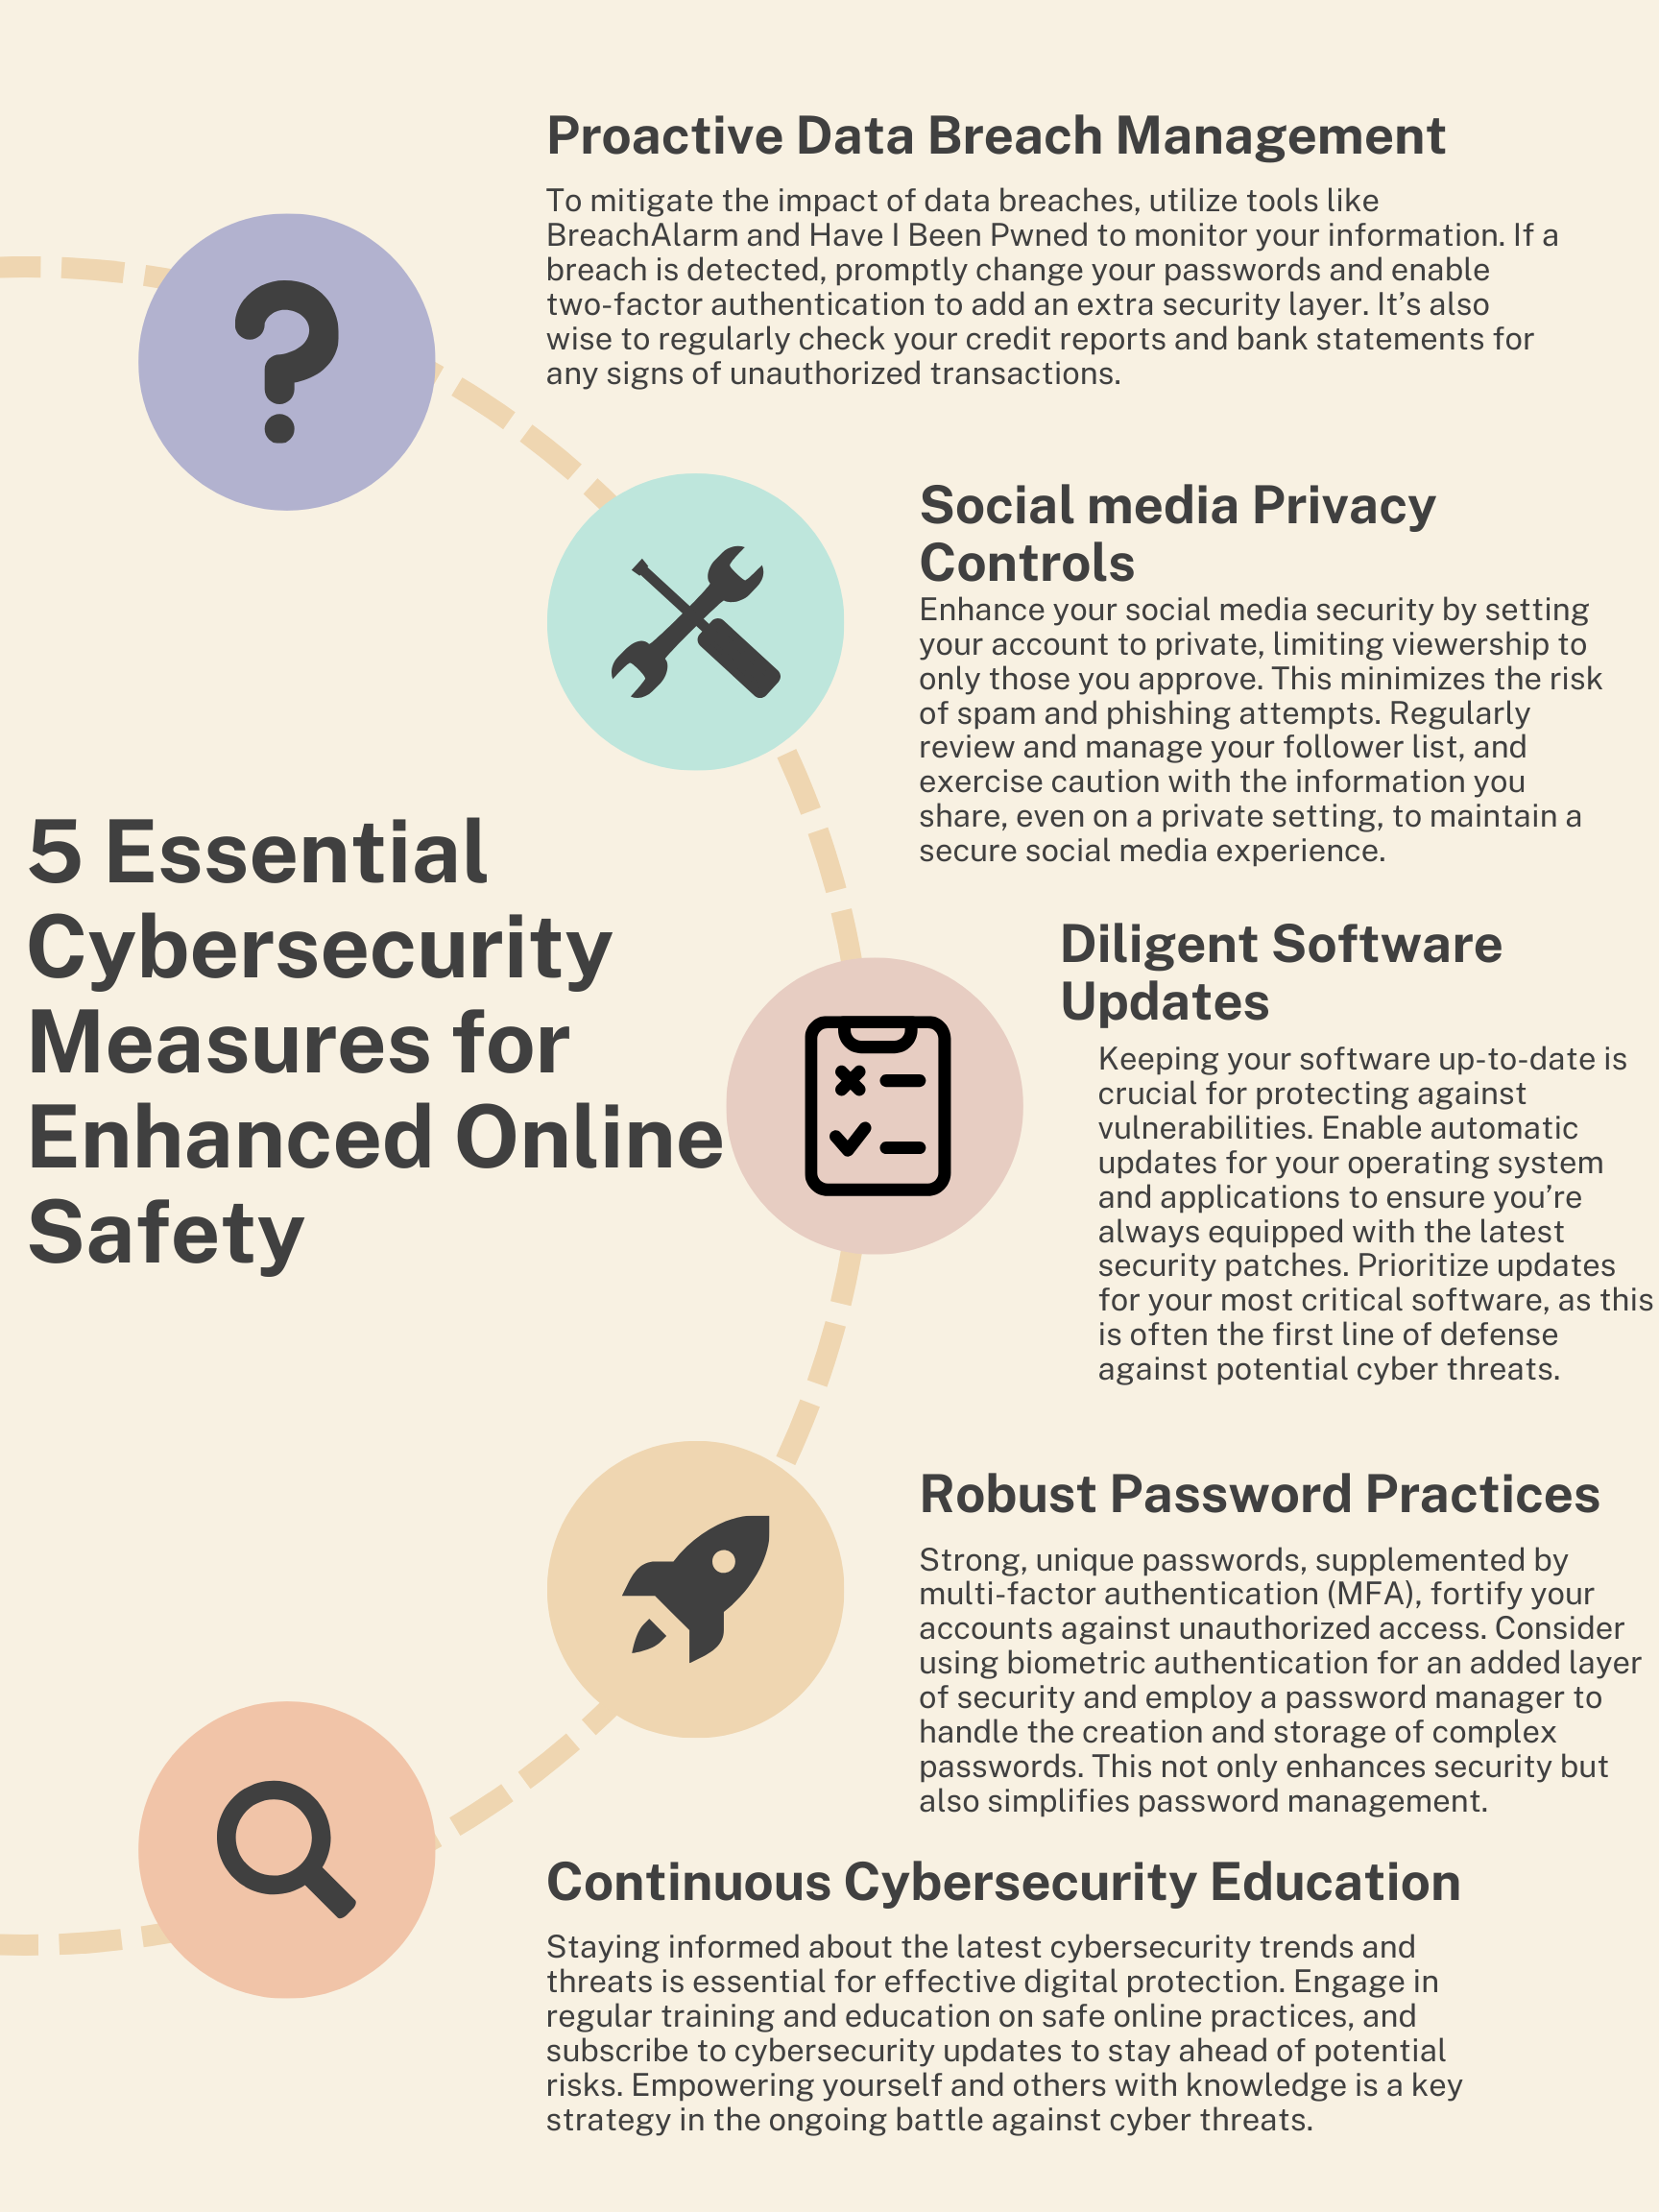 5-Essential-Cybersecurity-Measures-for-Enhanced-Online-Safety.png